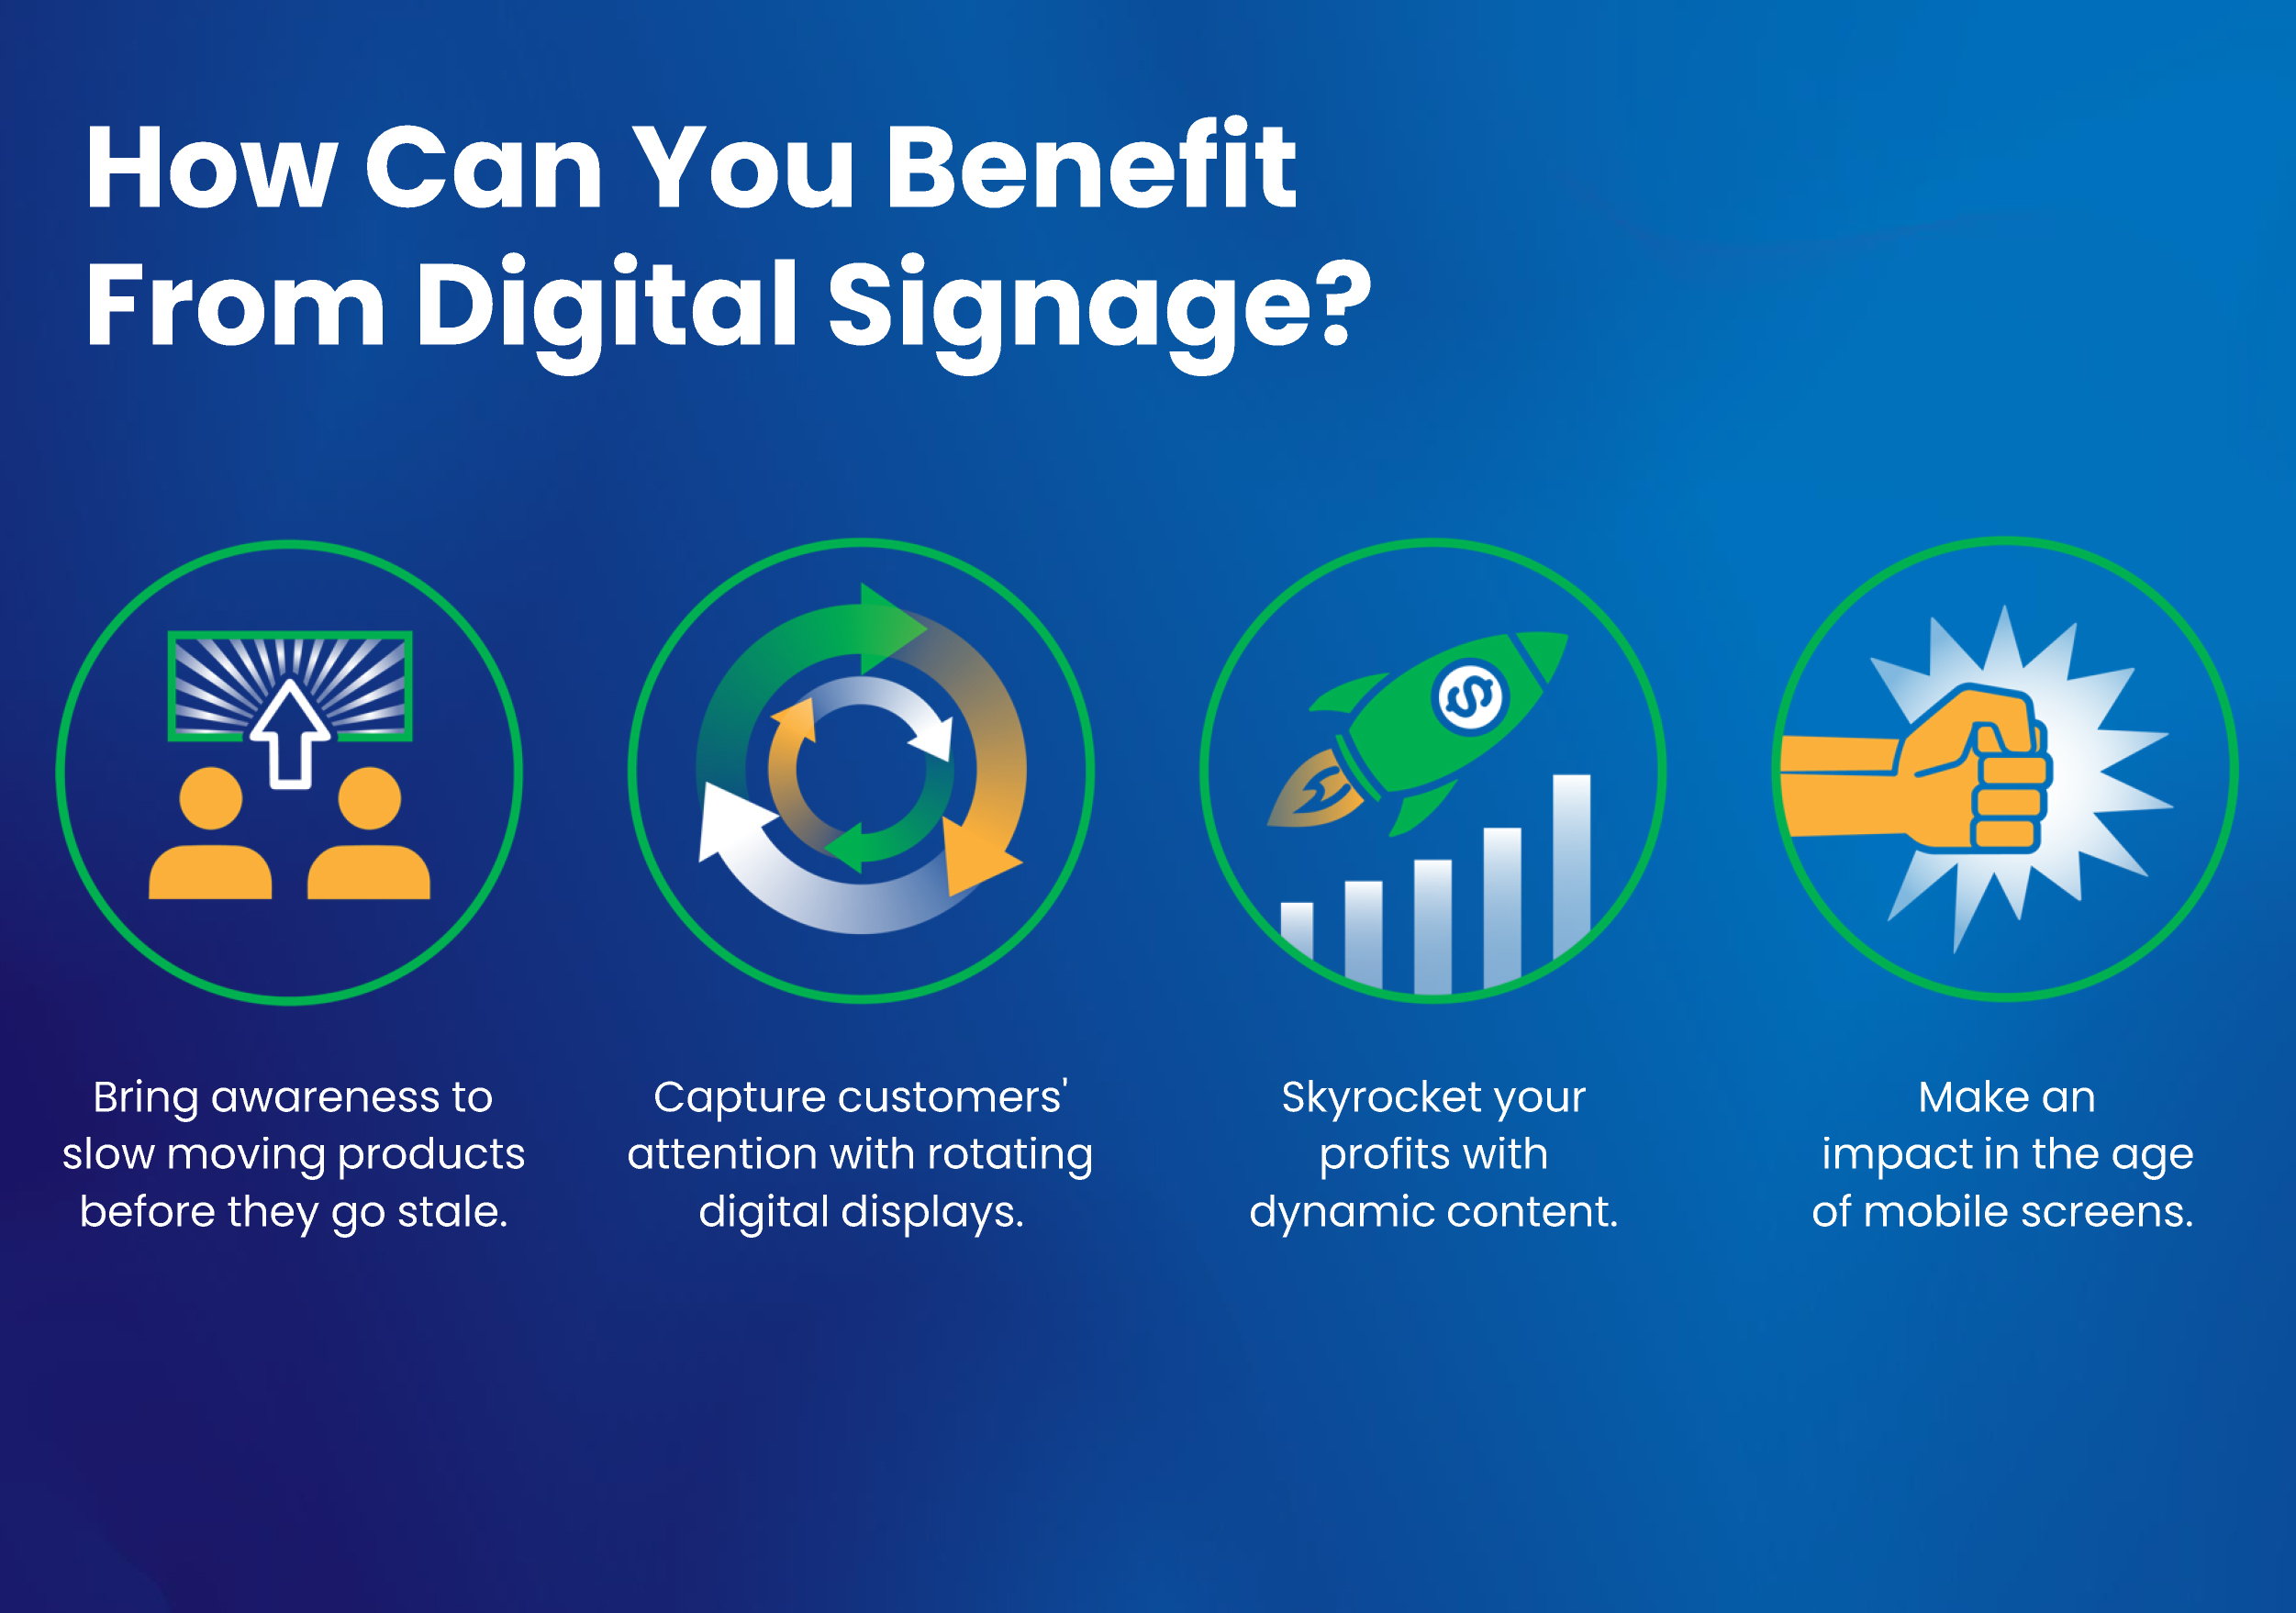 FTx Digital Signage includes a full suite of tools that will enhance your in-store marketing with over 1,000's of design templates.